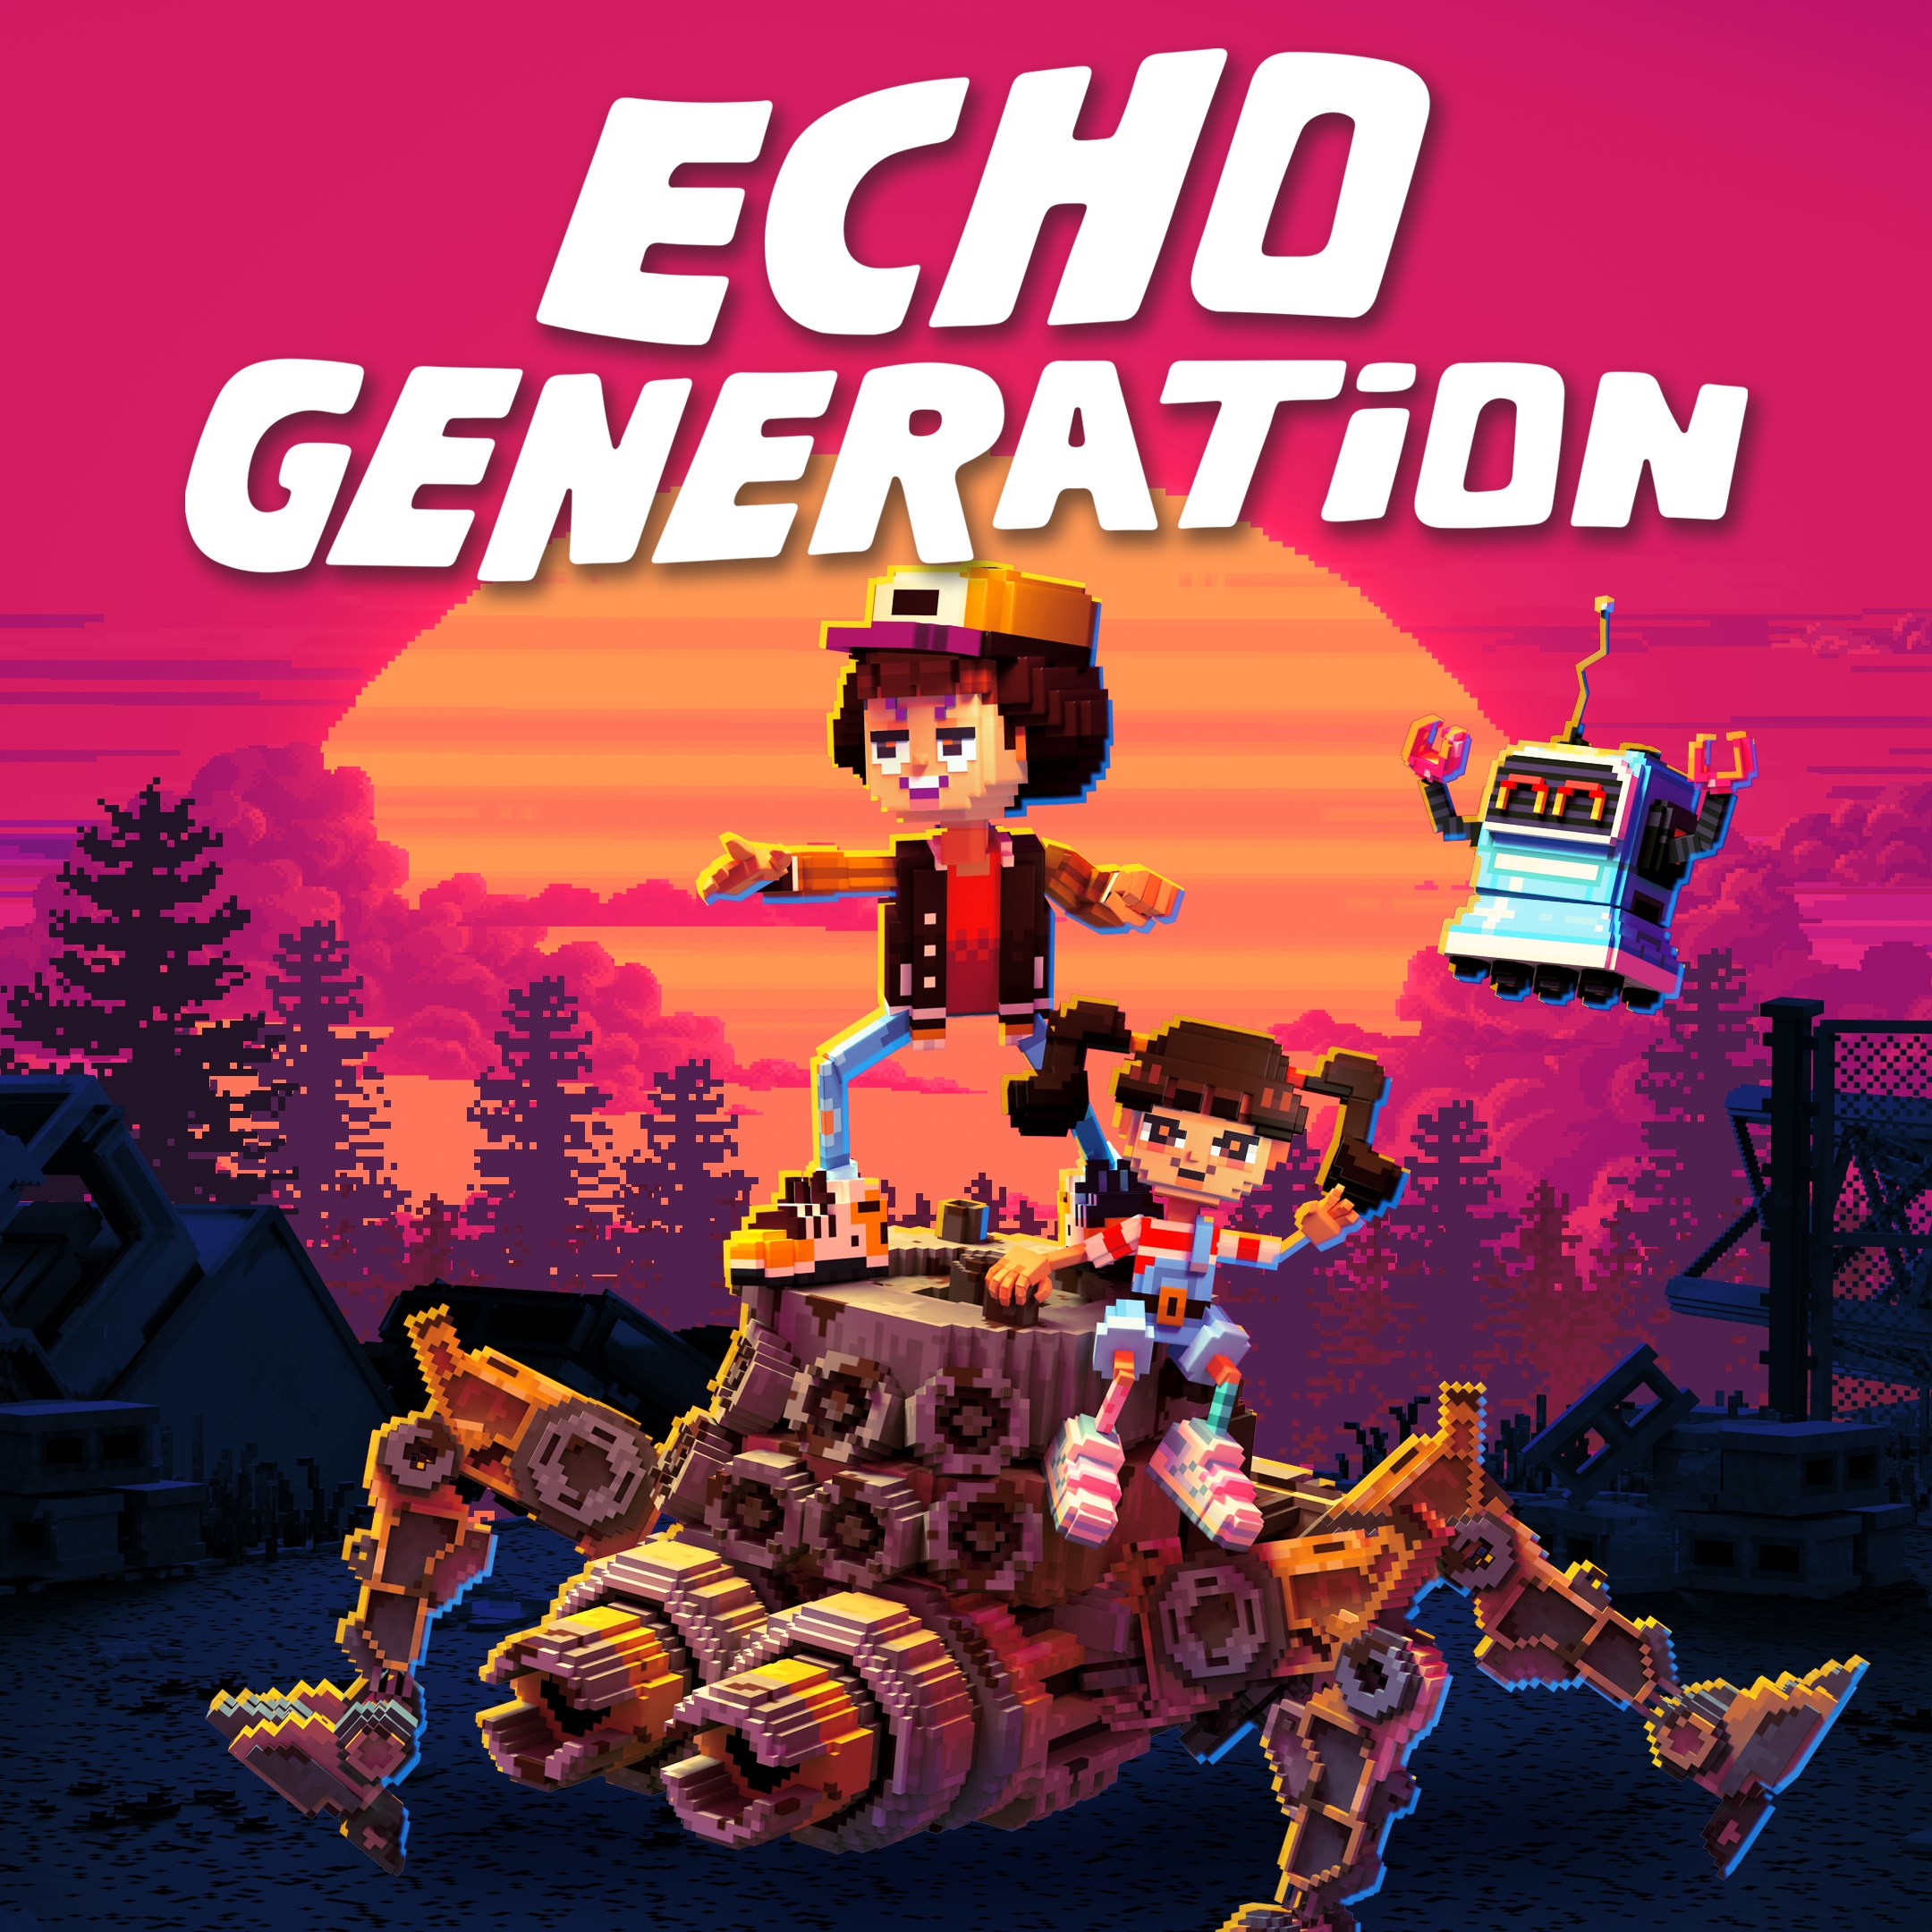 Echo Generation technical specifications for computer